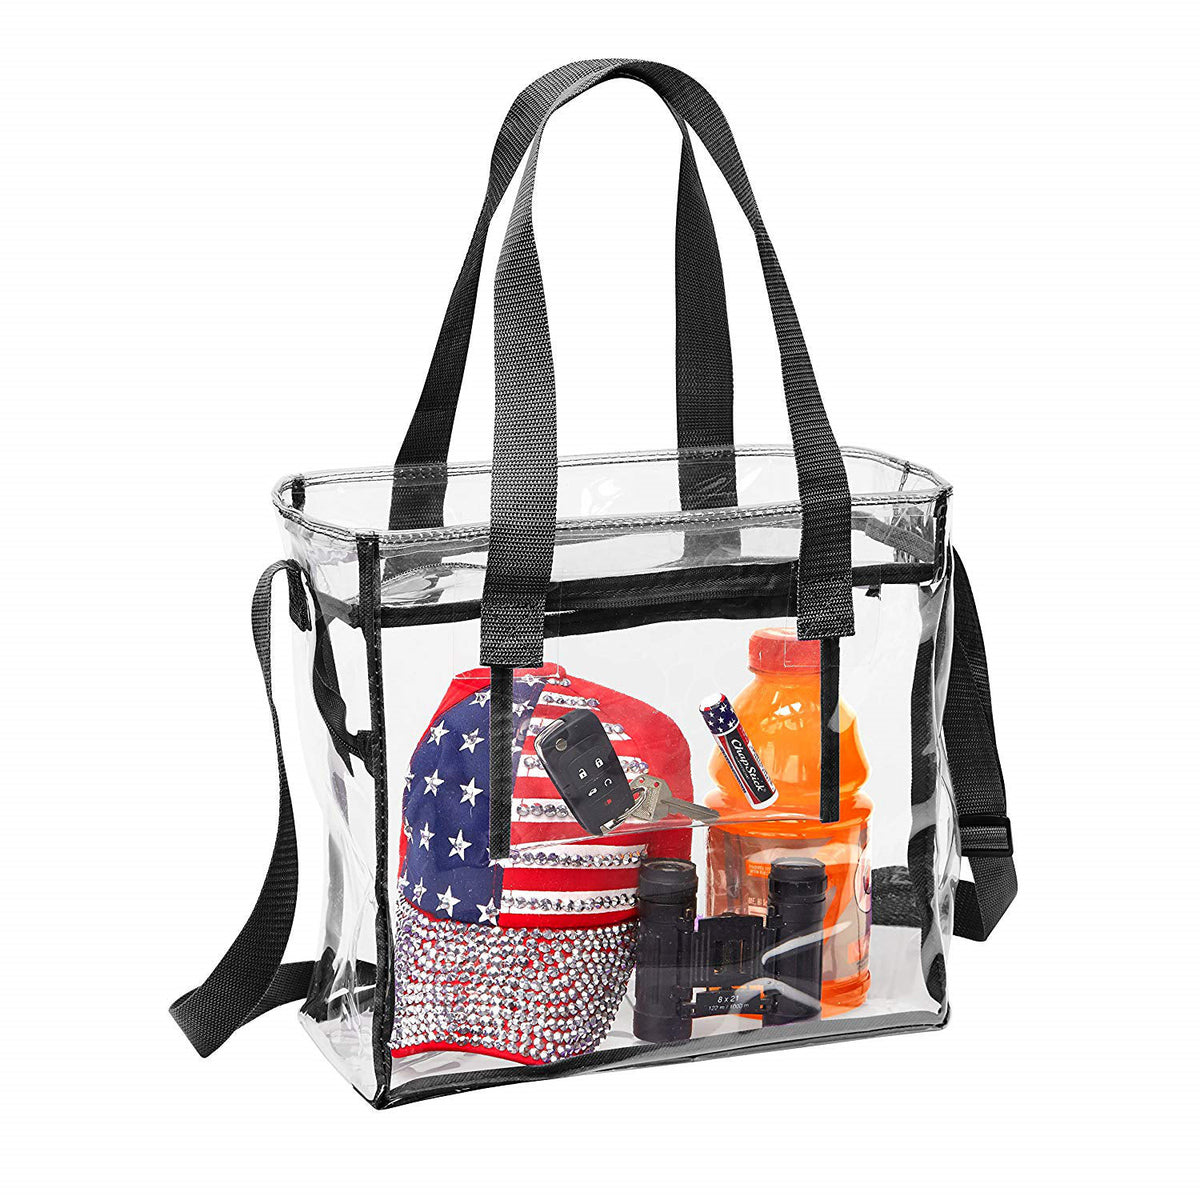 Deluxe Clear 12 x 12 x 6 Cross-Body Stadium Tote Bag with Zipper Closure  and Interior Pocket (CH-1212A) - Black Trim